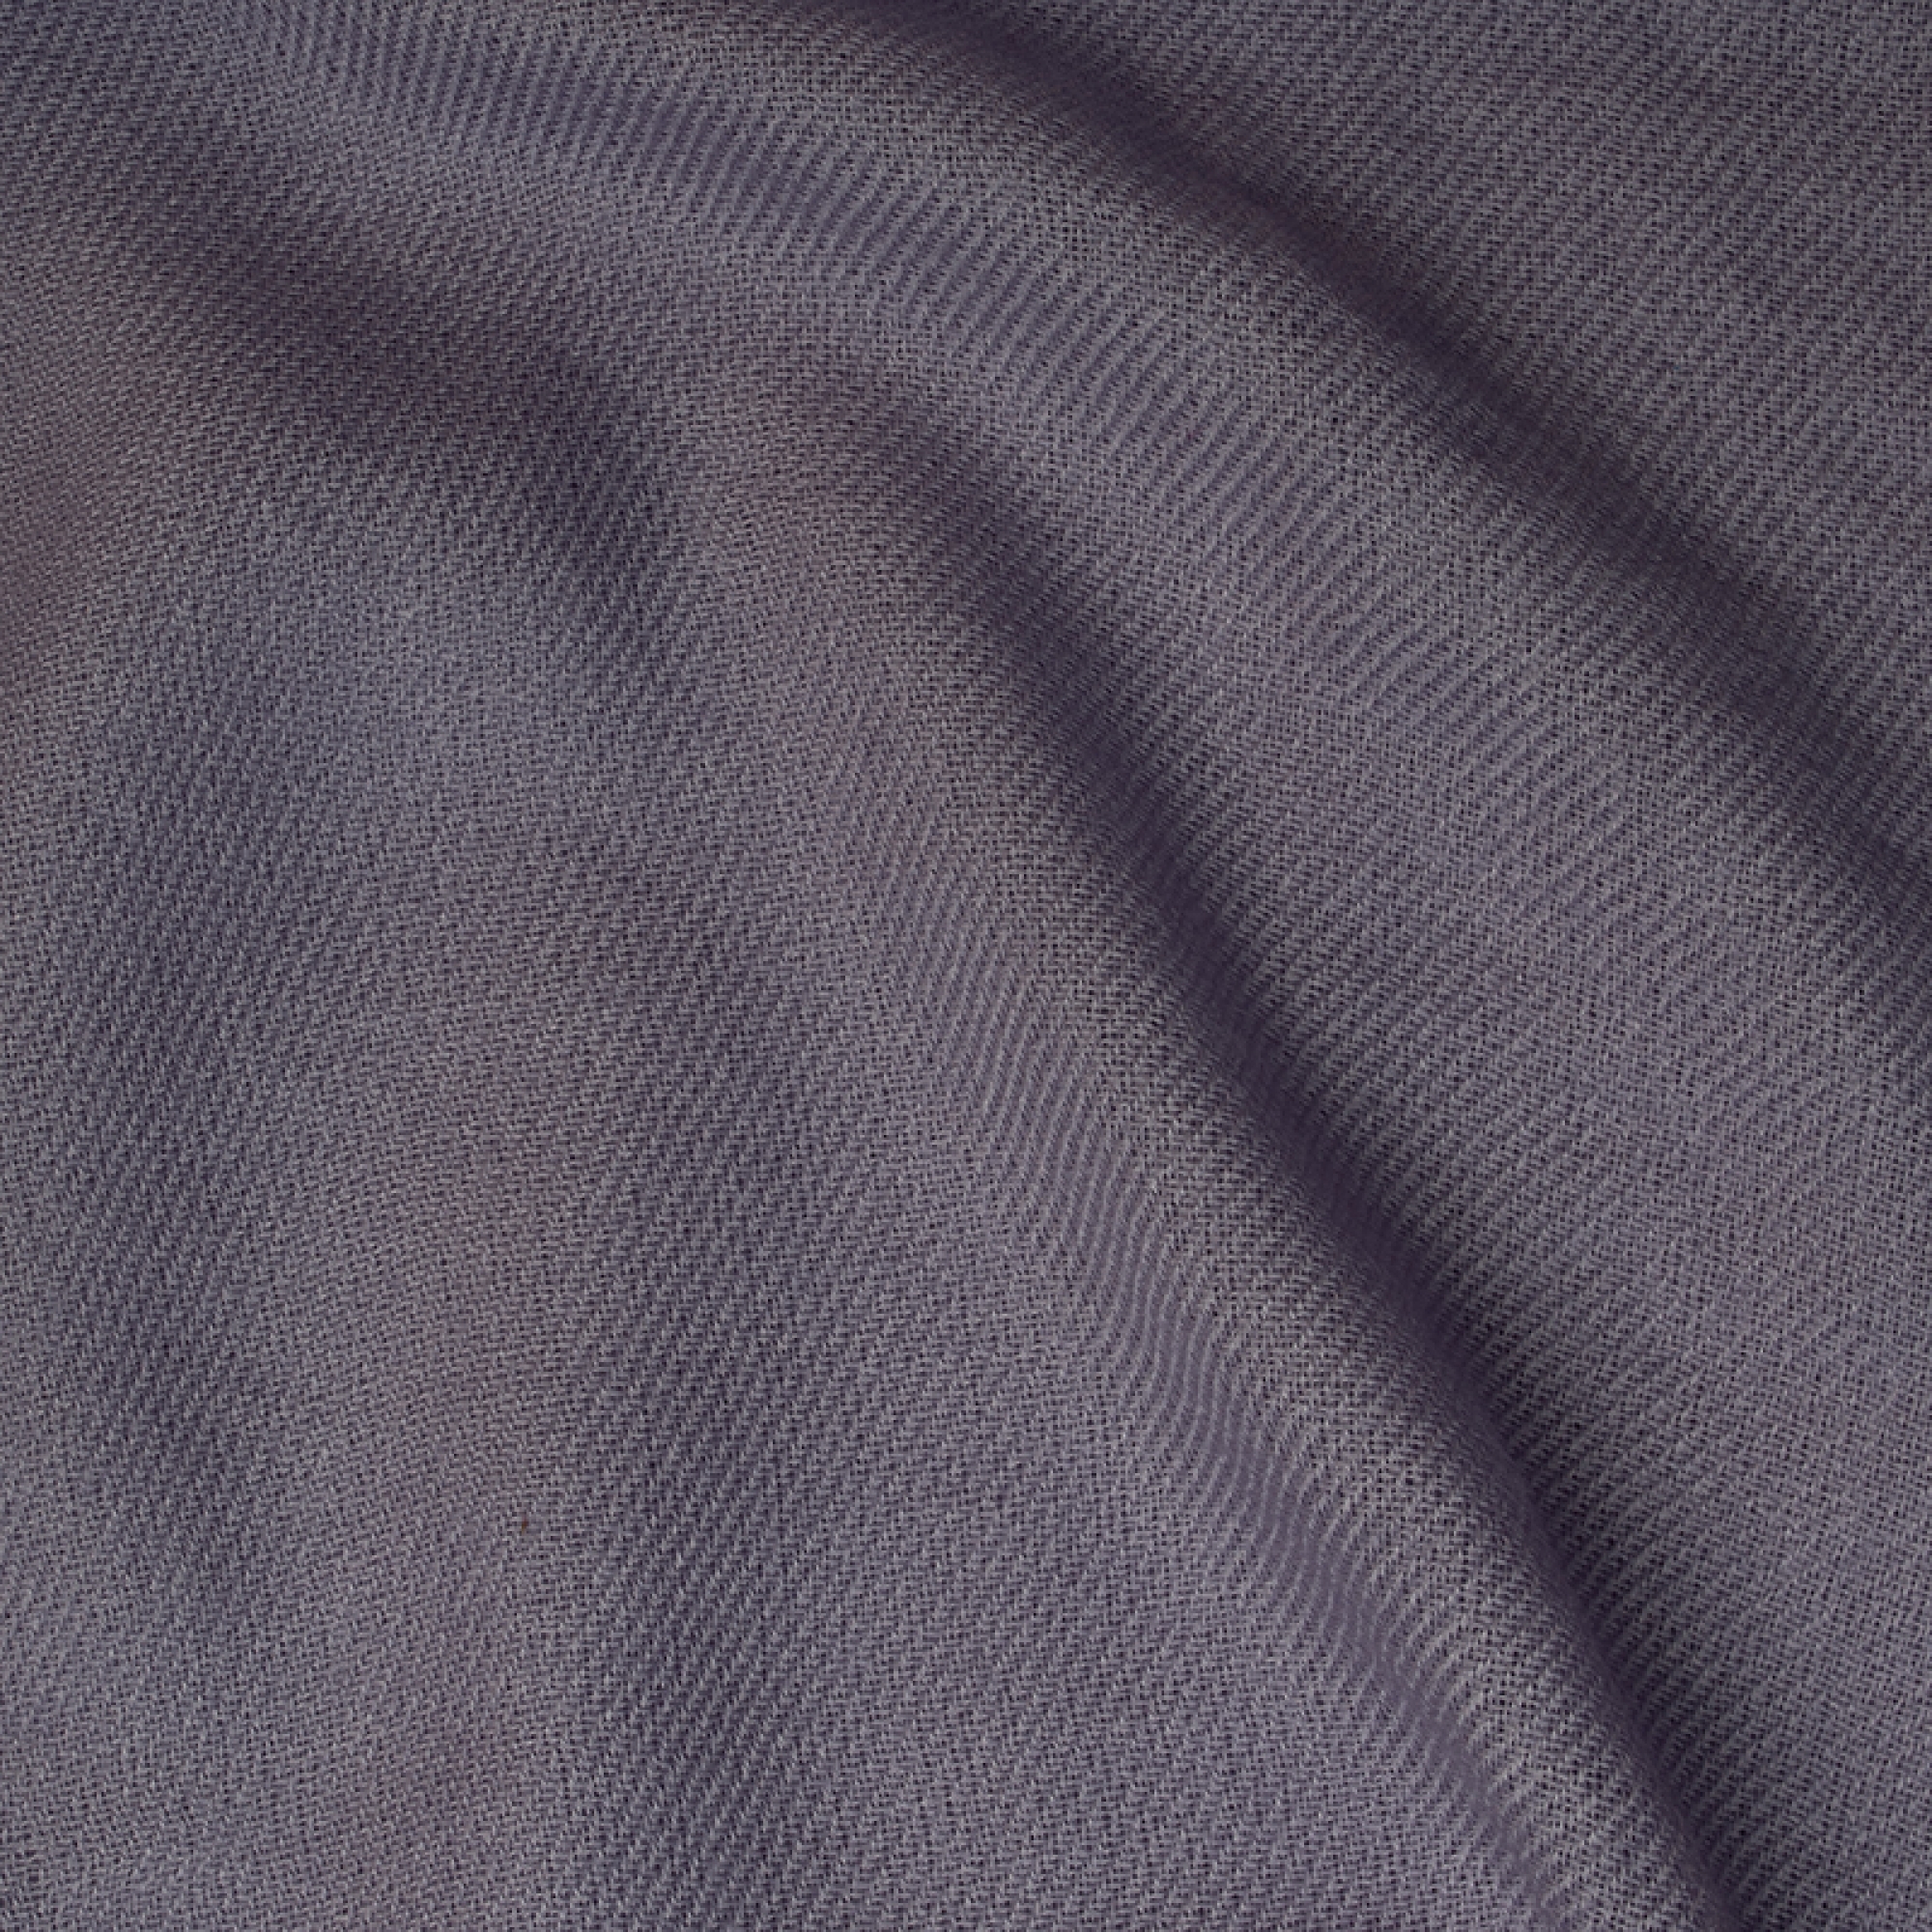 Cashmere accessories exclusive toodoo plain m 180 x 220 heirloom lilac 180 x 220 cm